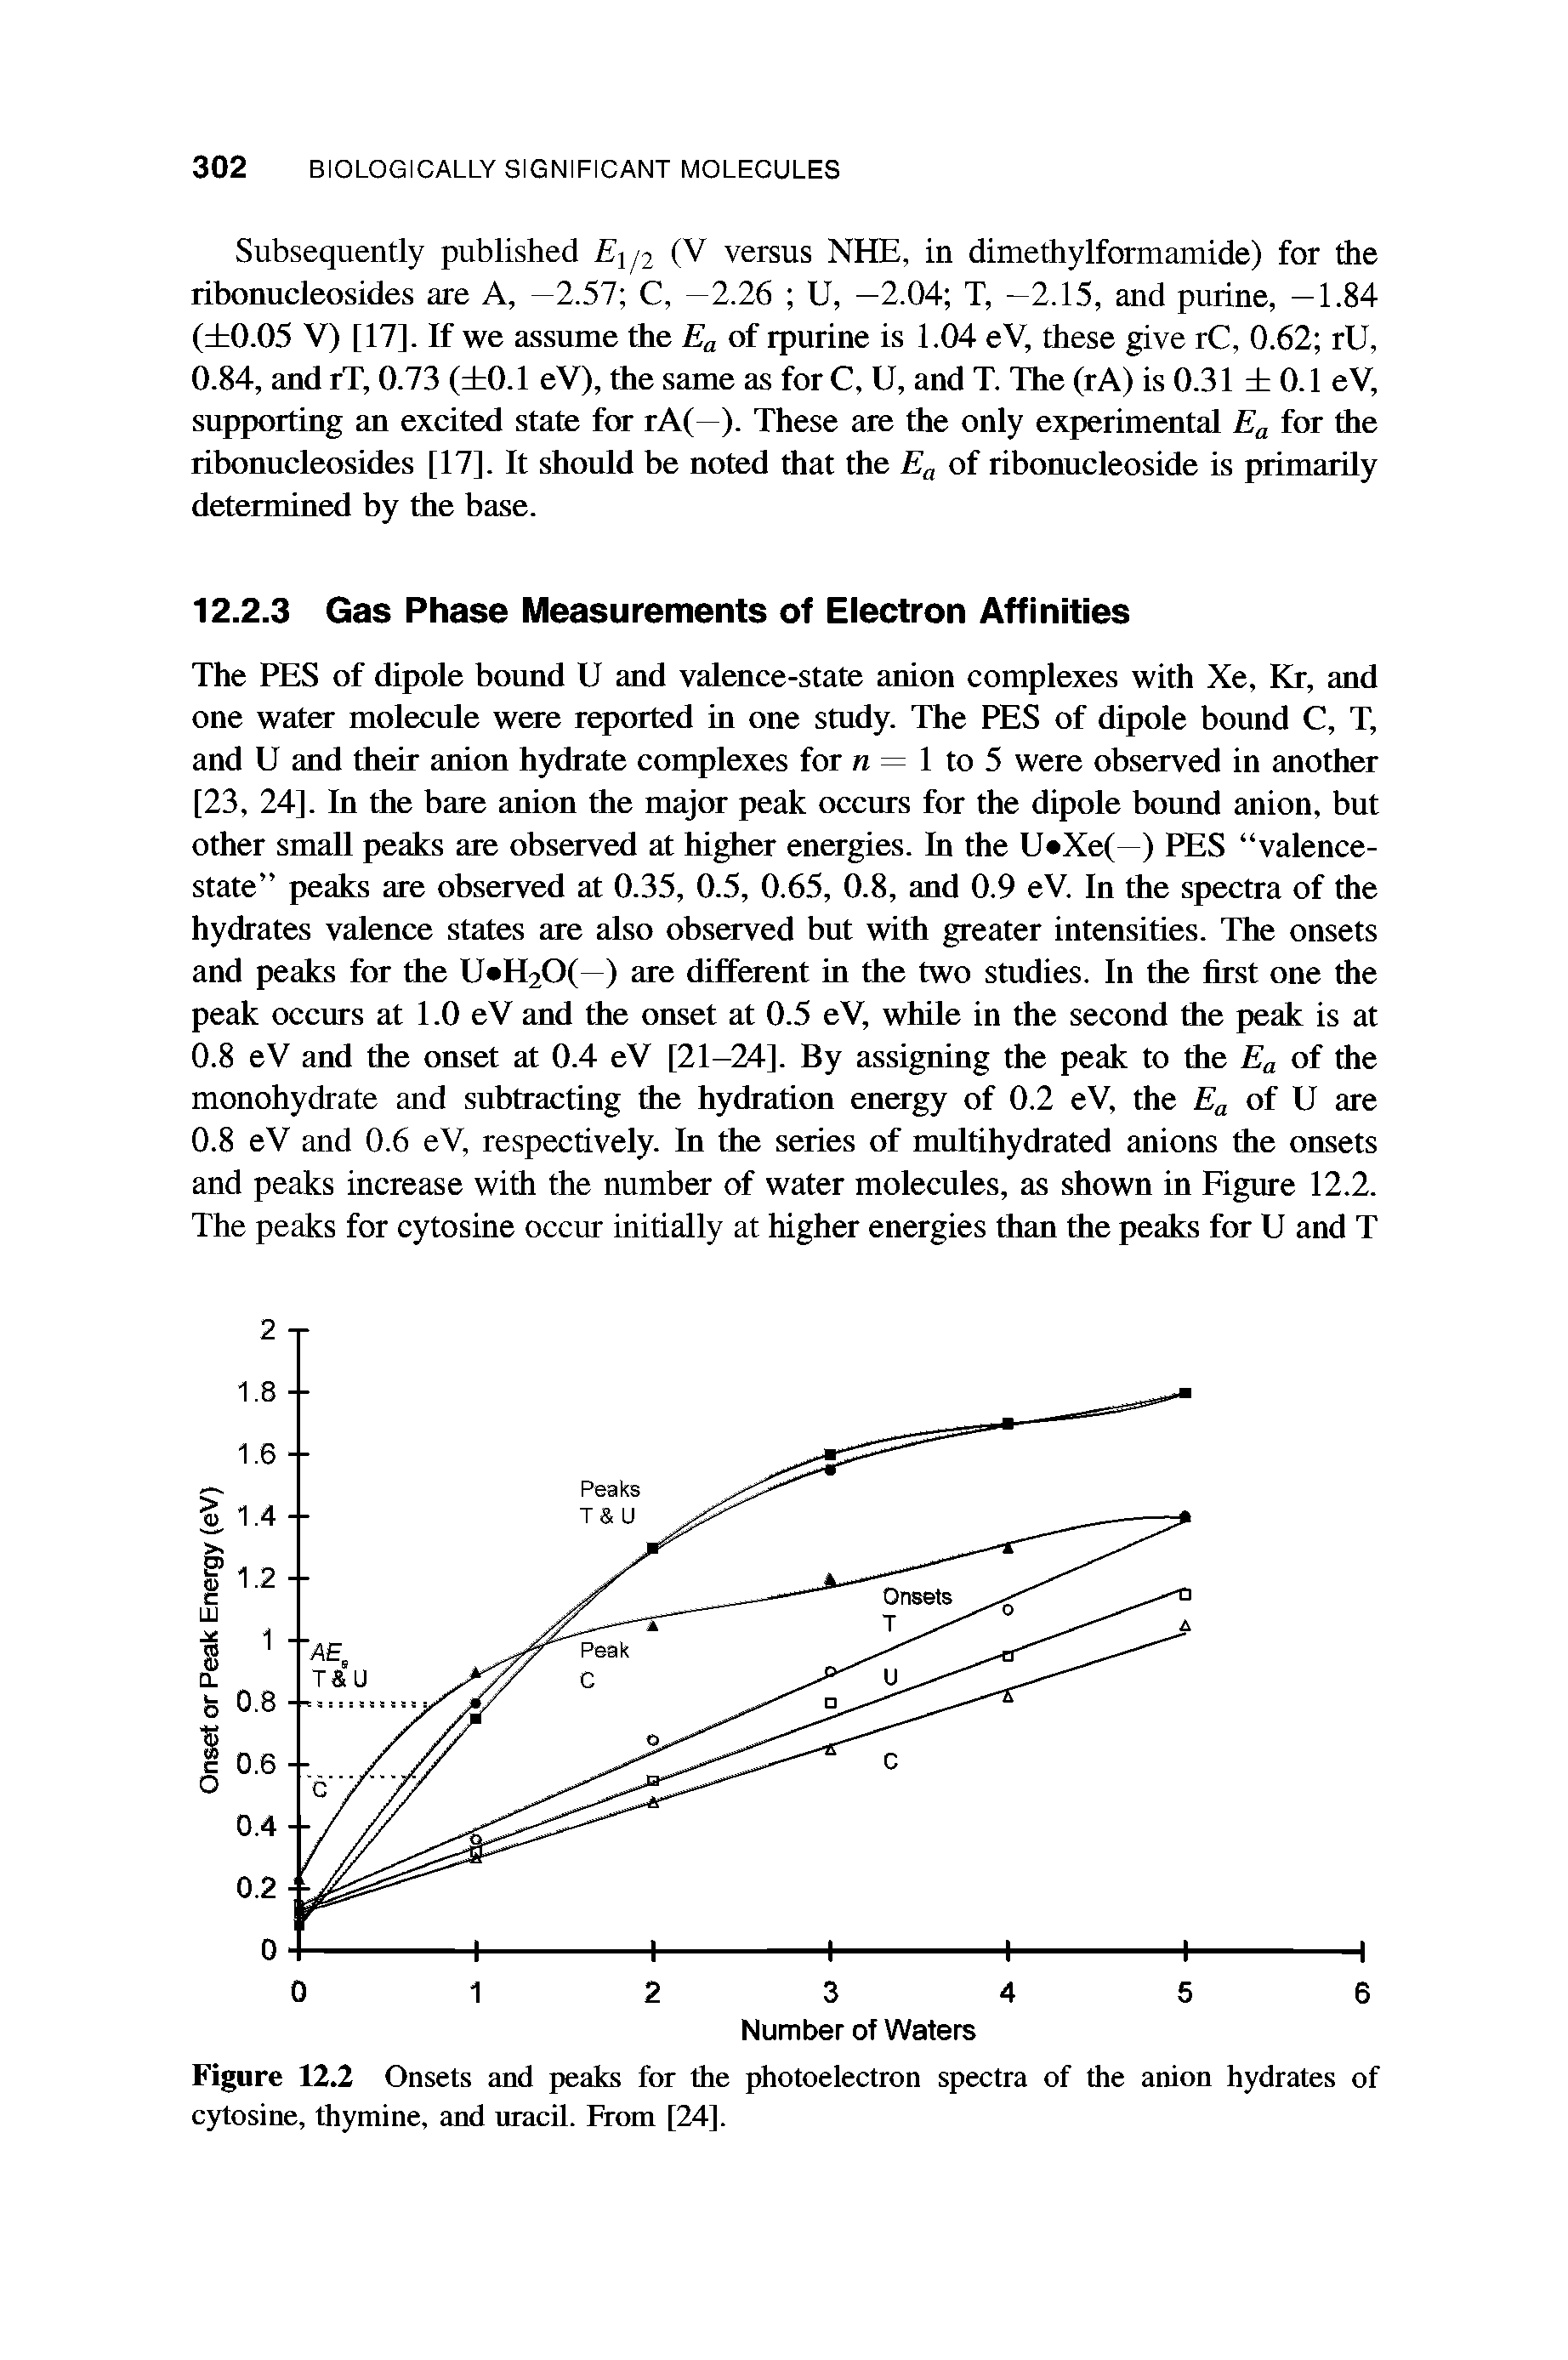 Figure 12.2 Onsets and peaks for the photoelectron spectra of the anion hydrates of cytosine, thymine, and uracil. From [24].